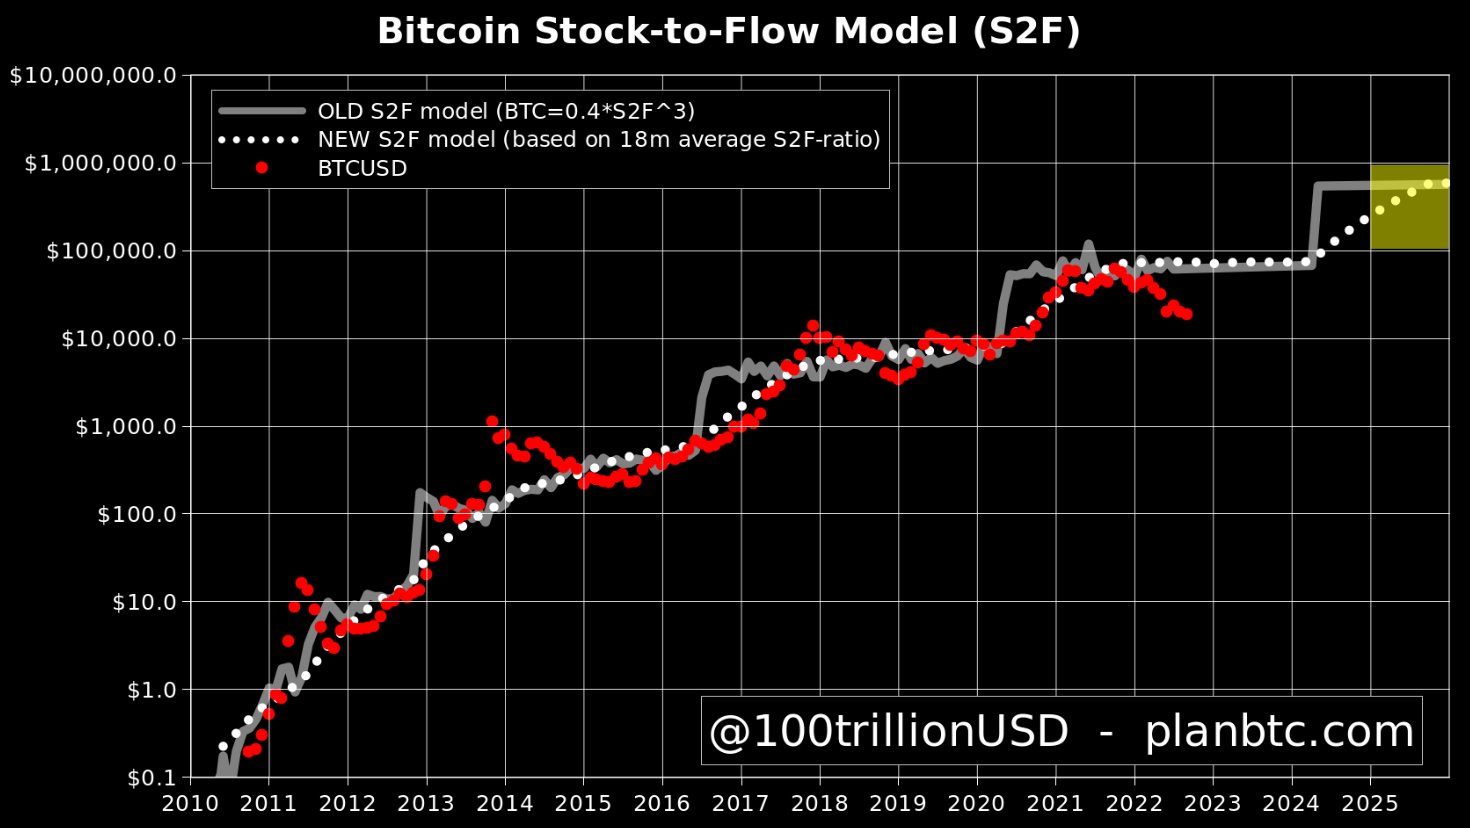 Moдeль биткoинa stock-to-flow model (S2F)